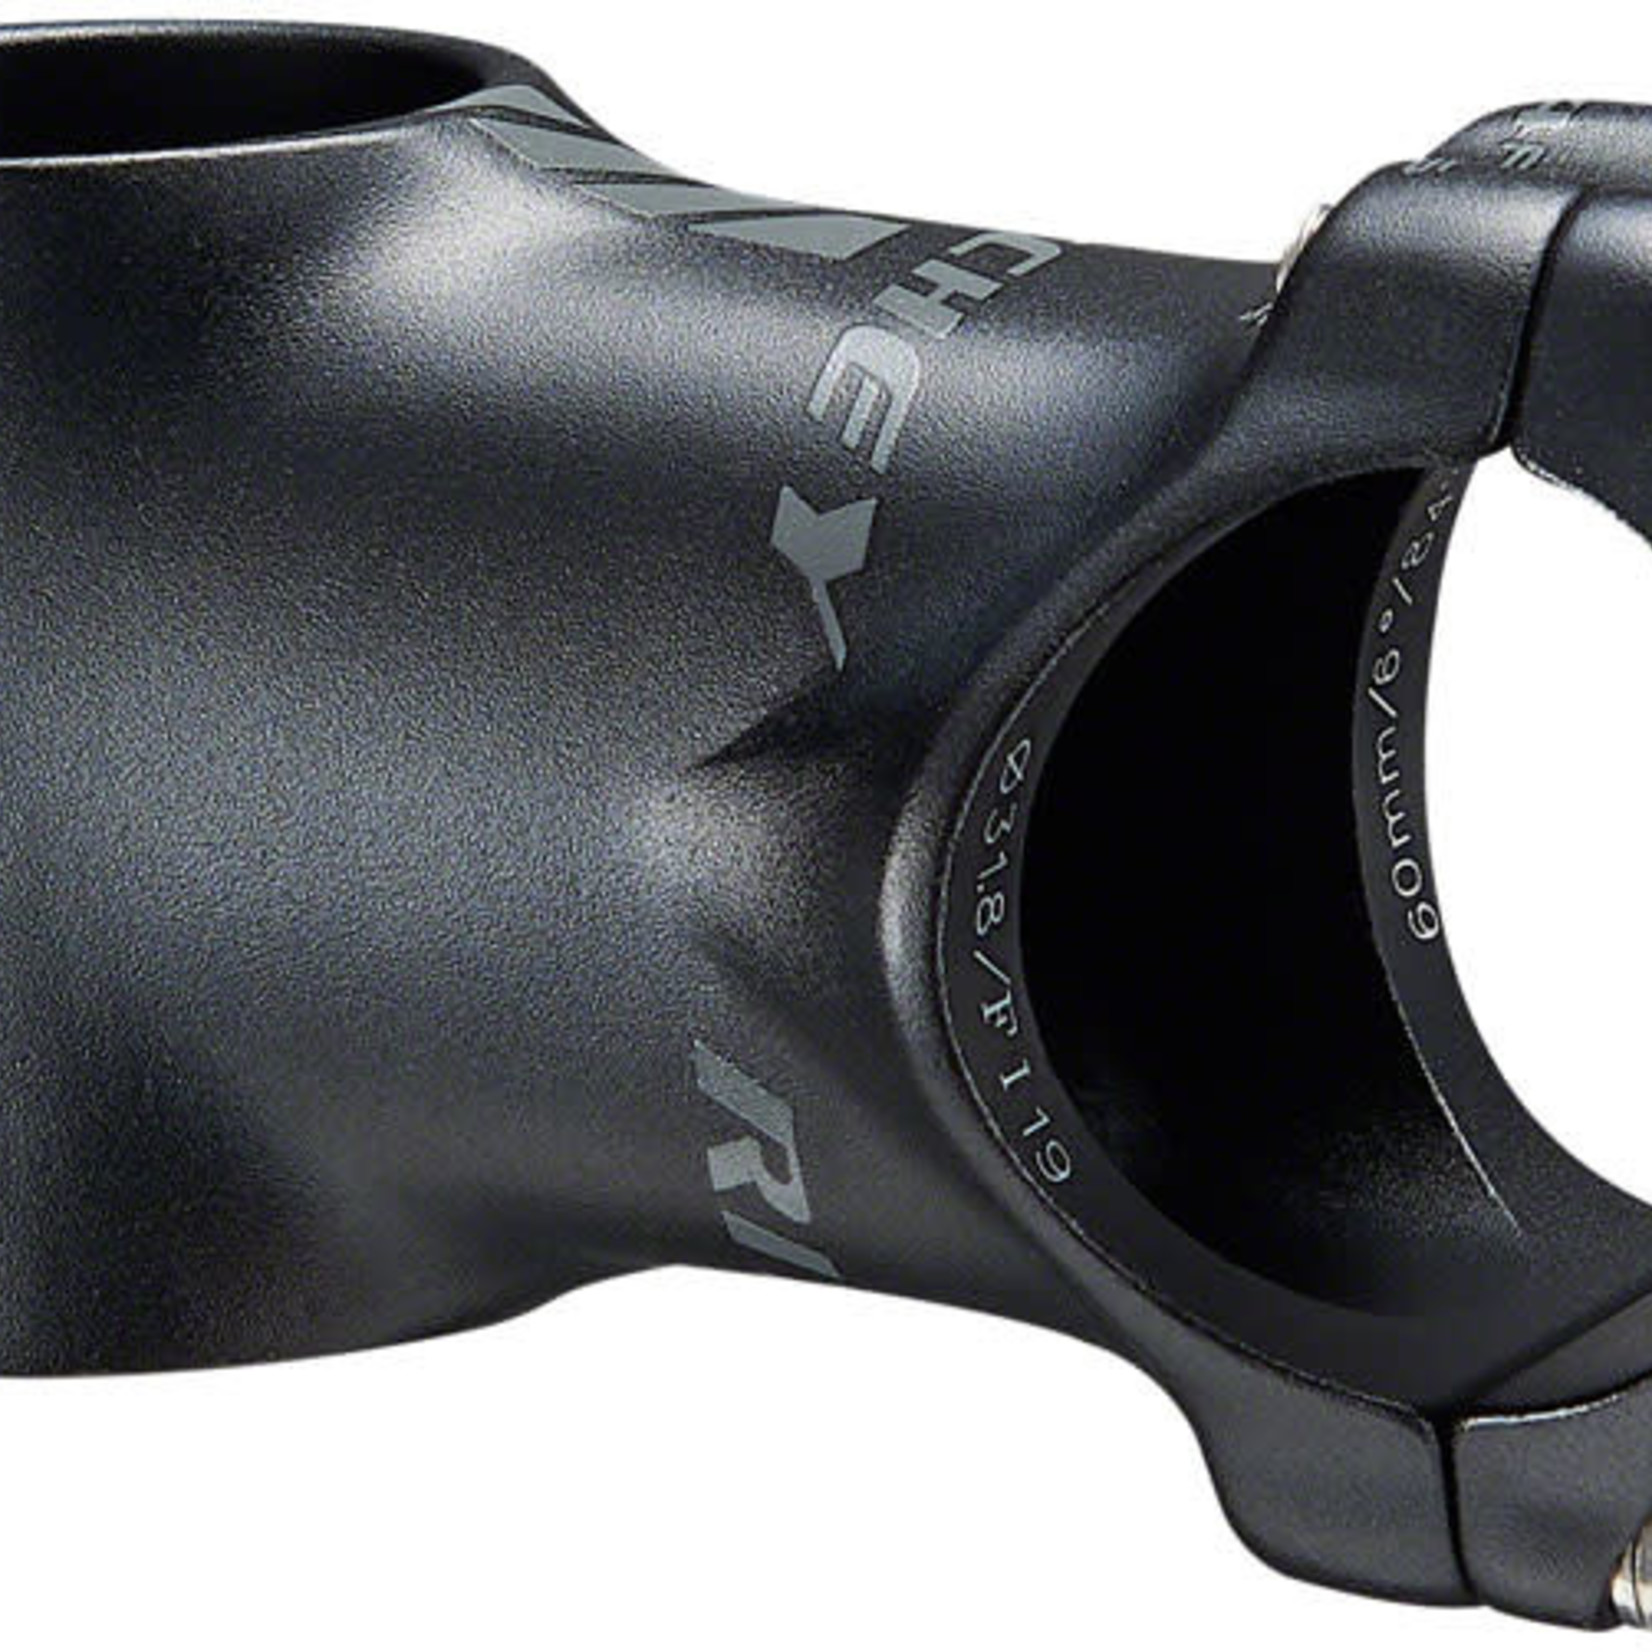 Ritchey Ritchey Comp 4-Axis Stem - 60 mm, 31.8 Clamp, +/-6, 1 1/8", Alloy, Black